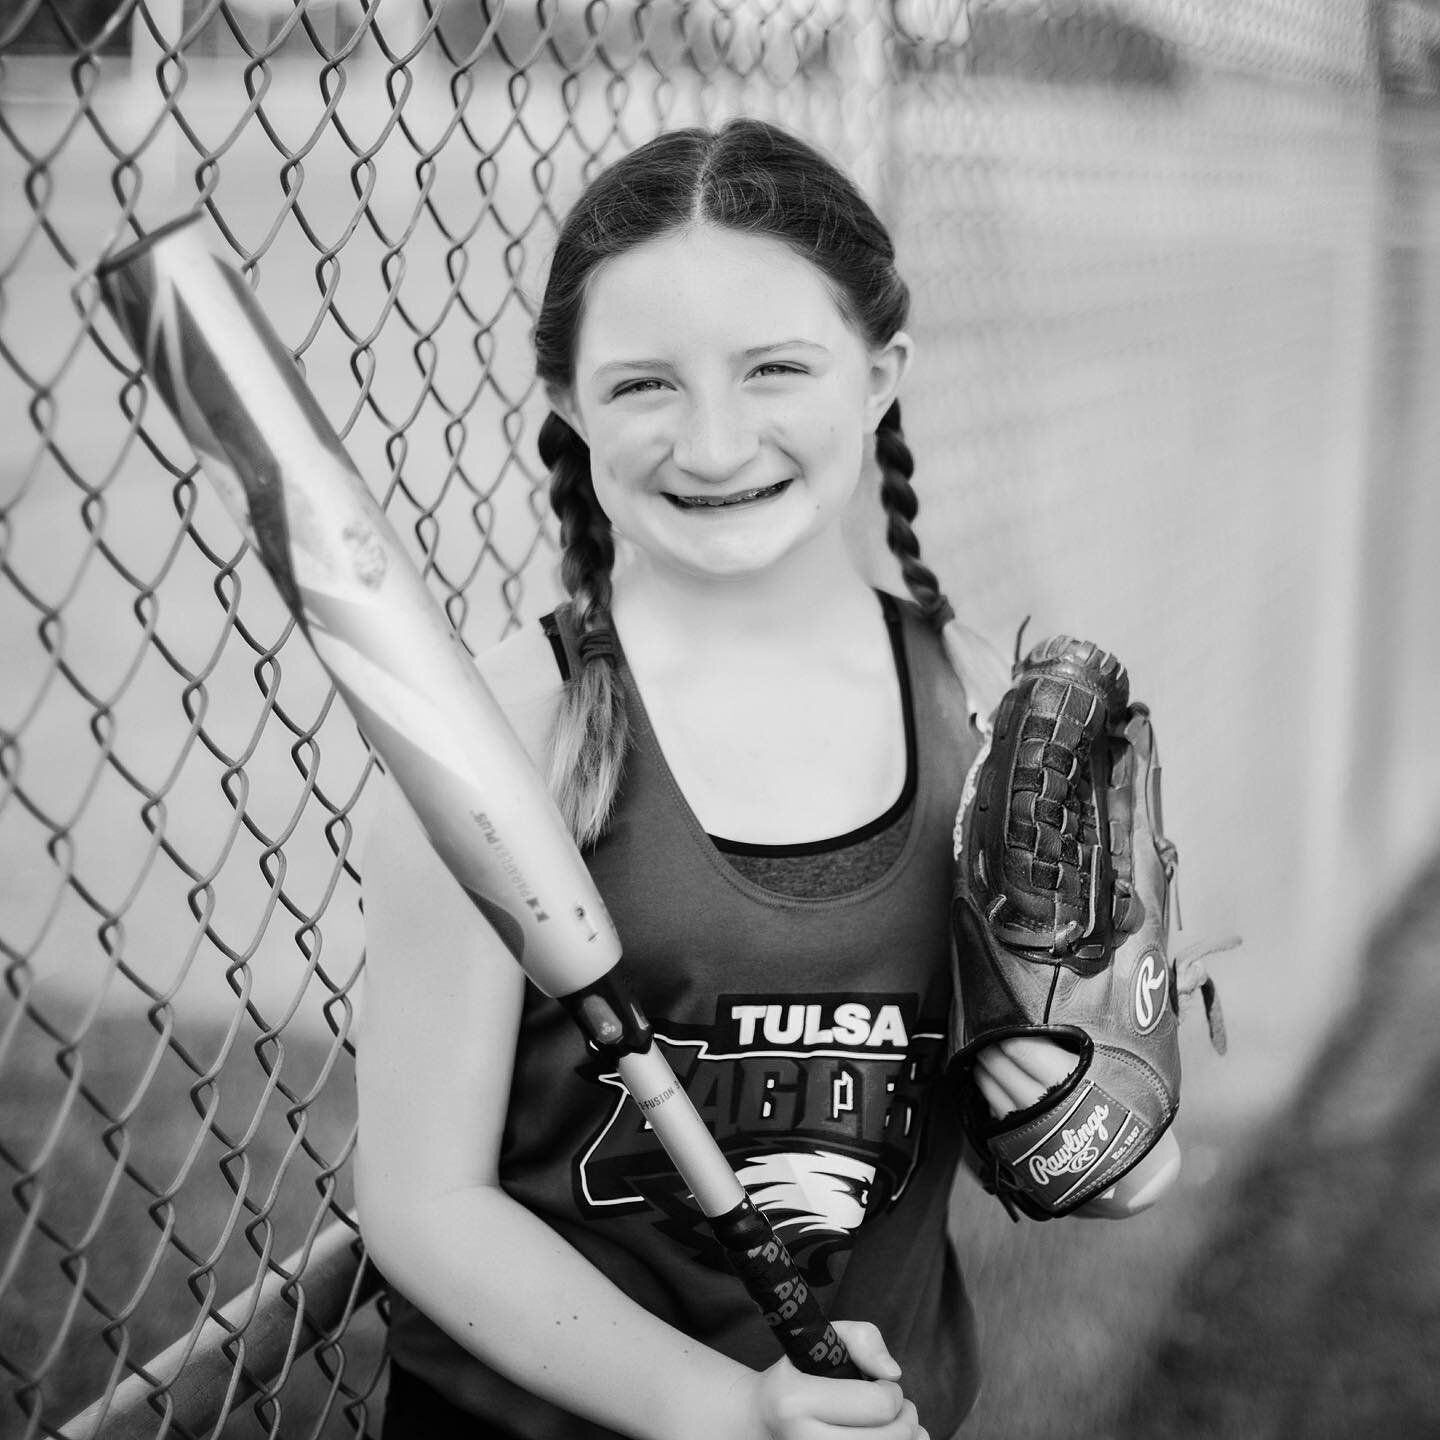 STUDENT FEATURE &mdash;

Kynder Stimson, 2028 pitcher out of Tulsa, OK.

The Empowered Player&rsquo;s youngest athlete! She is small, but she is MIGHTY.  Kynder is tenacious on the field and not afraid to get after it! She has the ability to rise to 